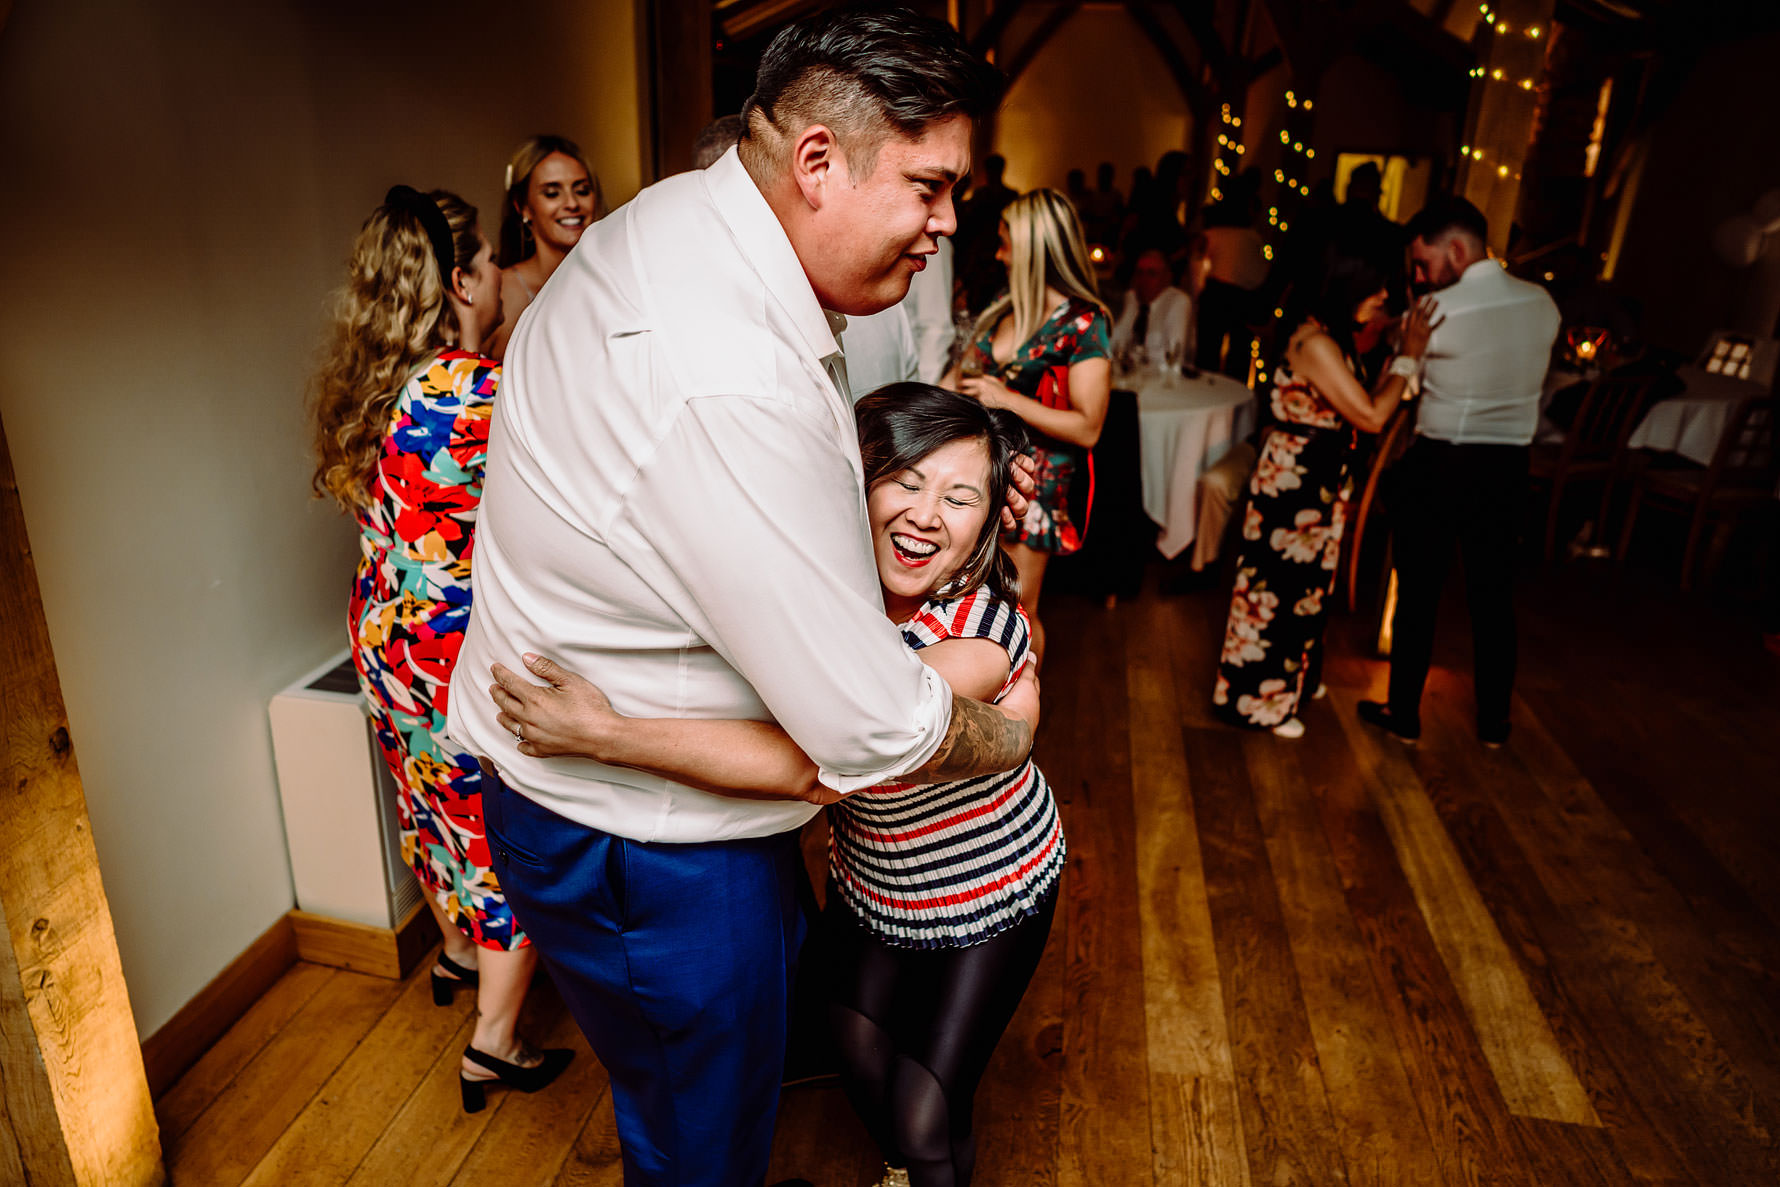 dodford manor barns wedding photography by Elliot W Patching Photography